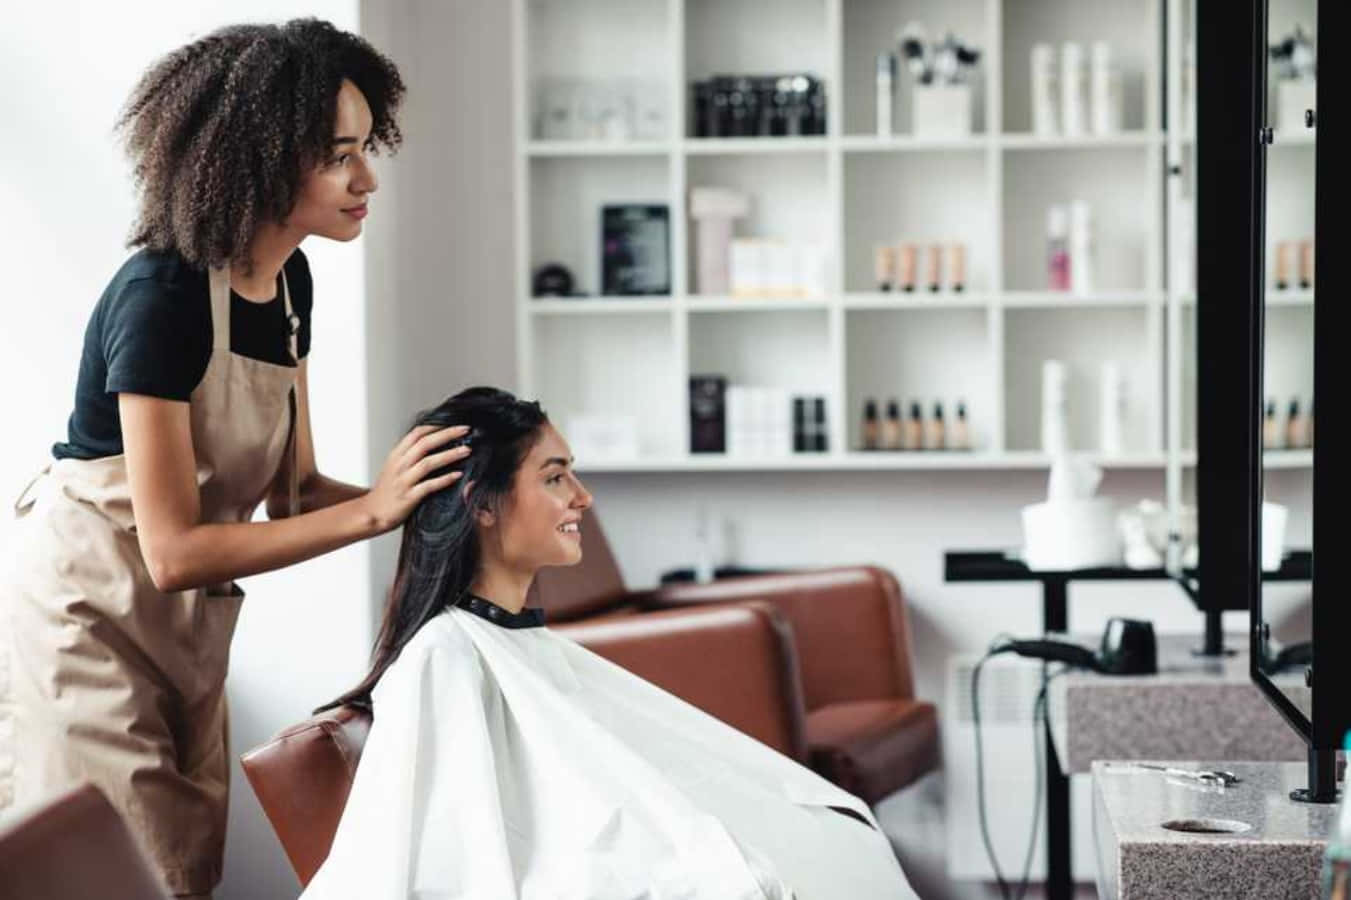 Boost your hair confidence with a trip to the salon